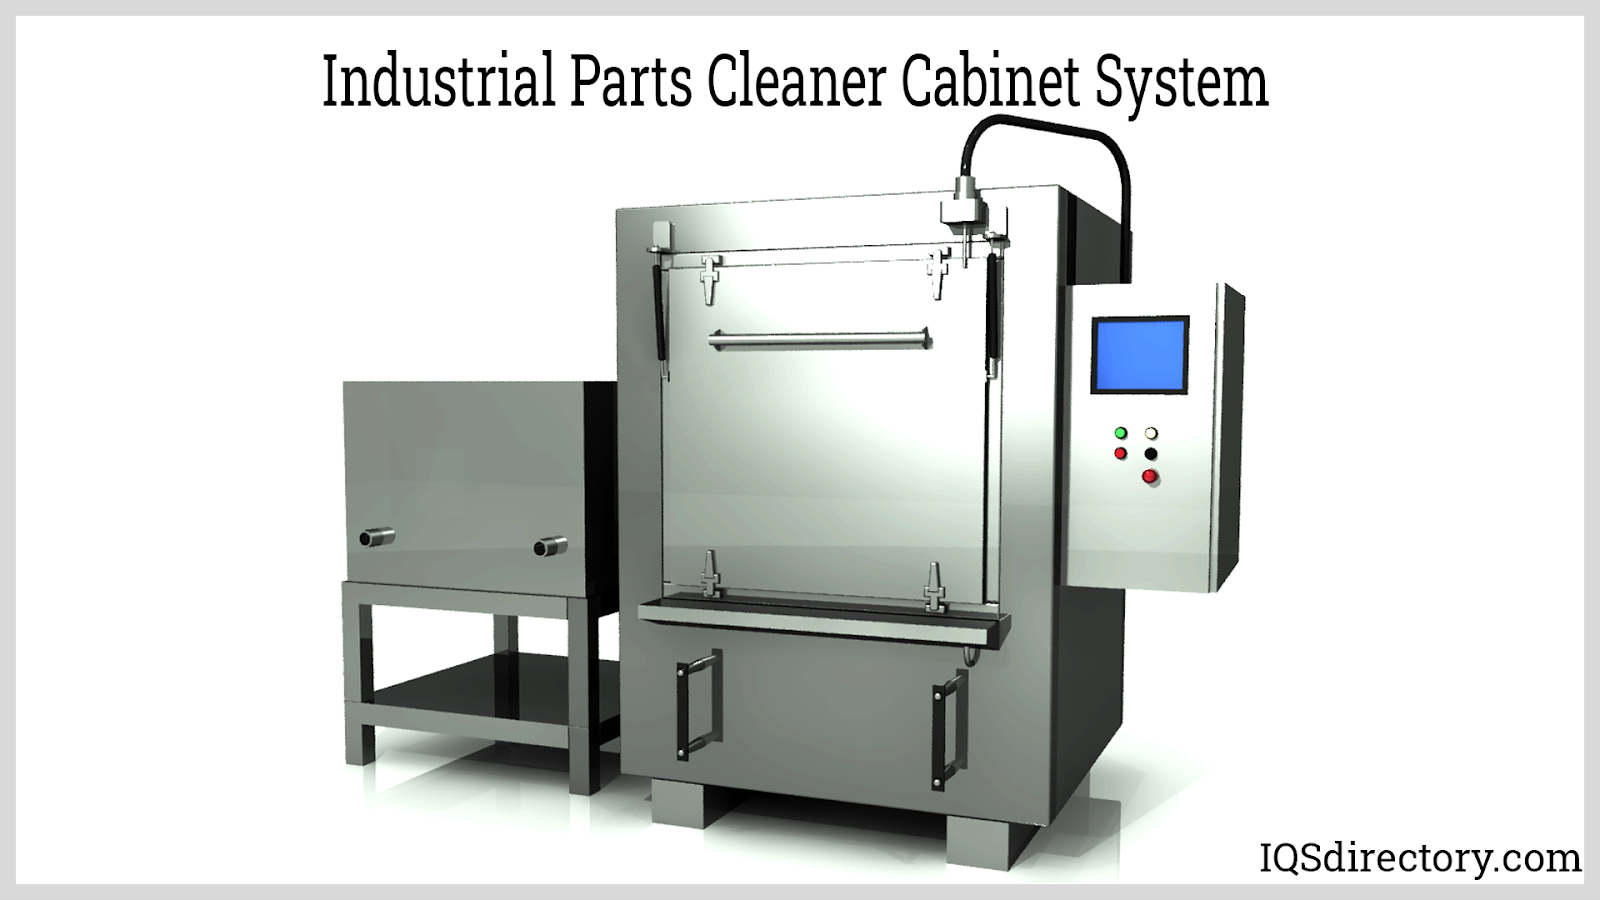 Industrial Parts Cleaner Cabinet System